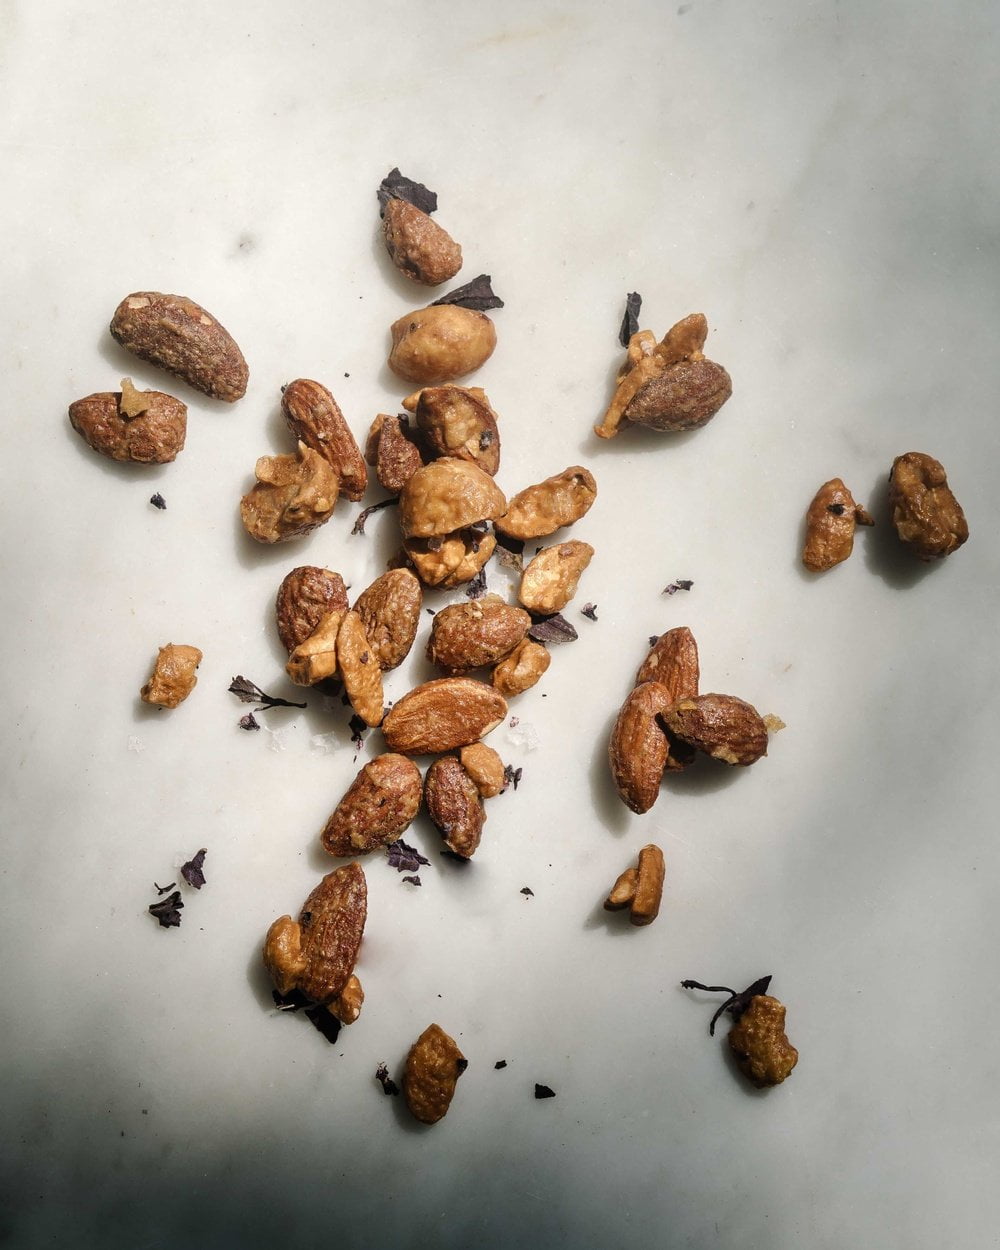 THE TINY FACTORY 150g ROASTED NUTS sweetly salted - Nussmischung